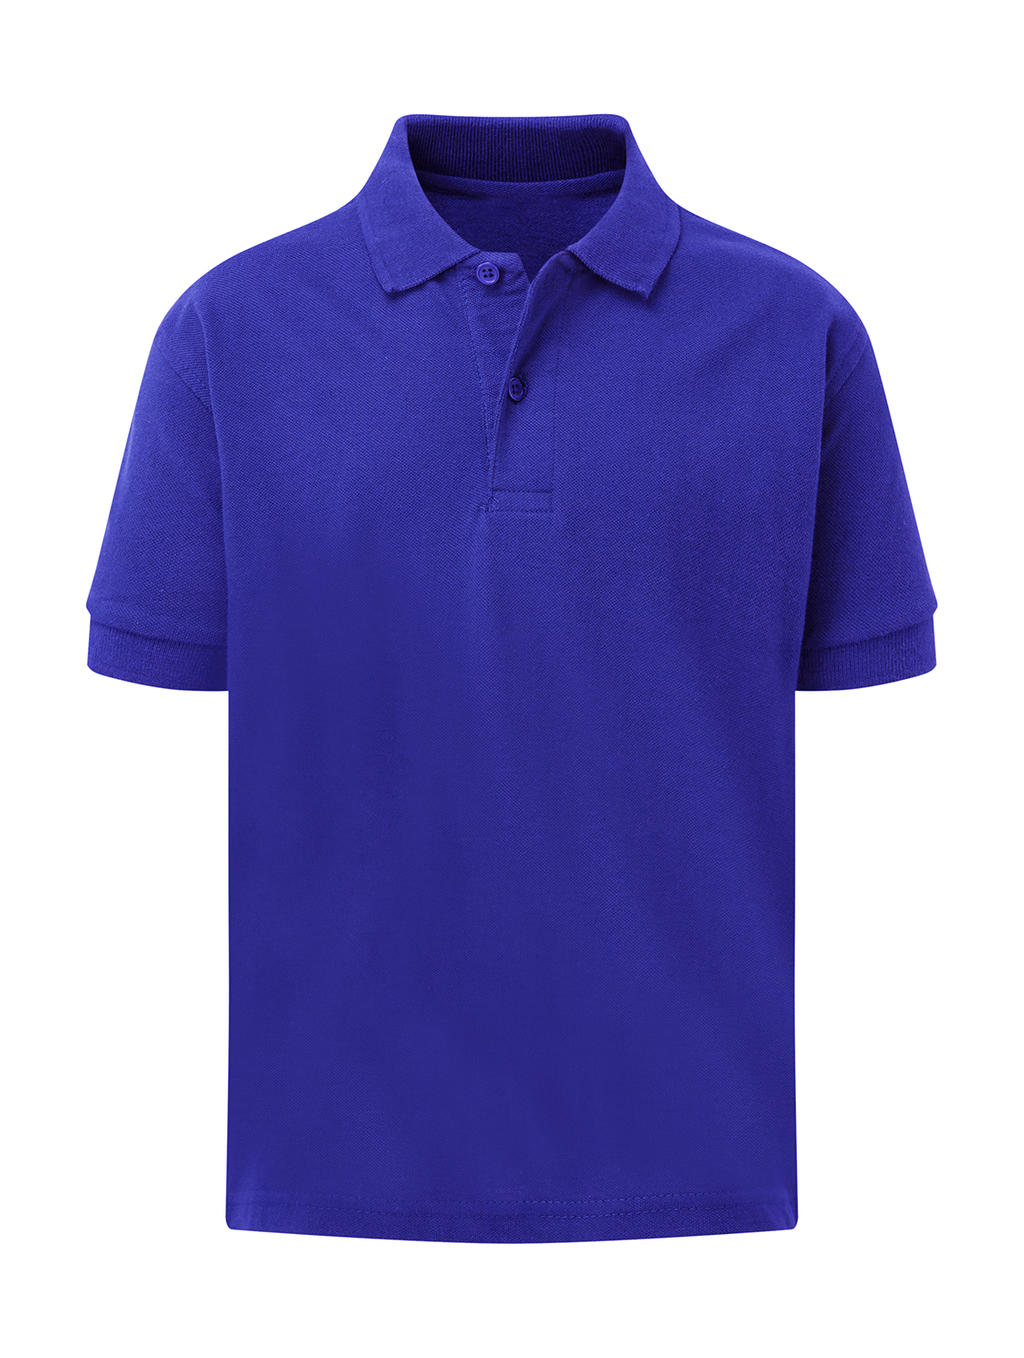  Kids Cotton Polo in Farbe Royal Blue